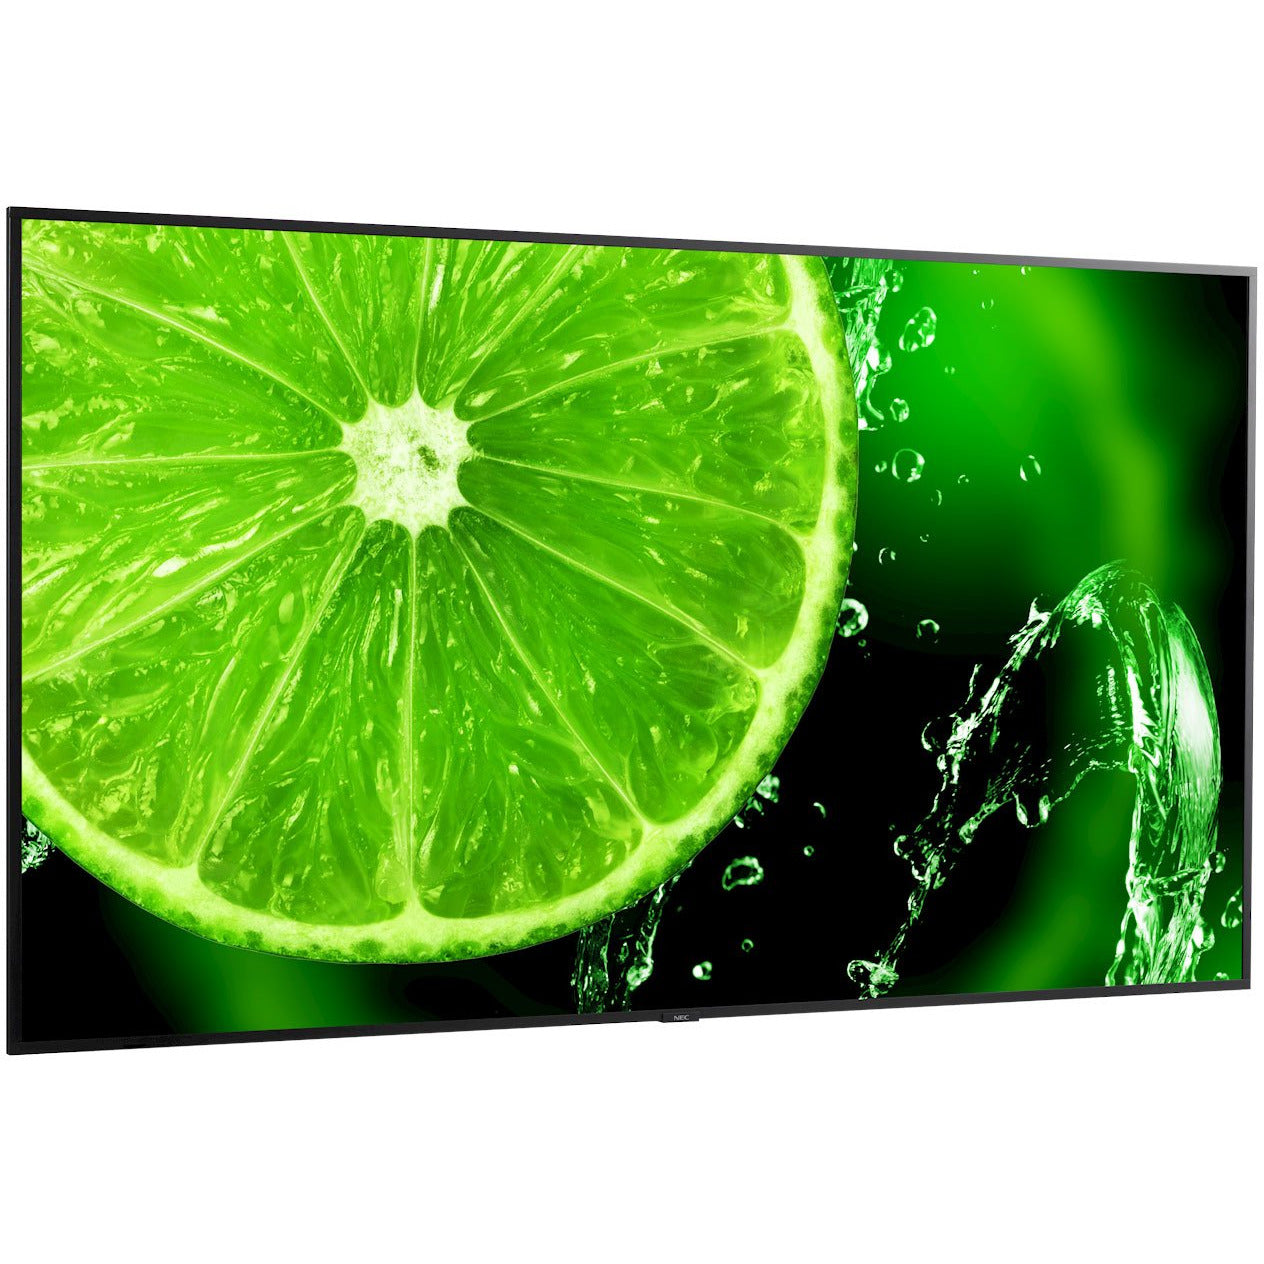 Lime Green NEC MultiSync® E758 LCD 75" Essential Large Format Display